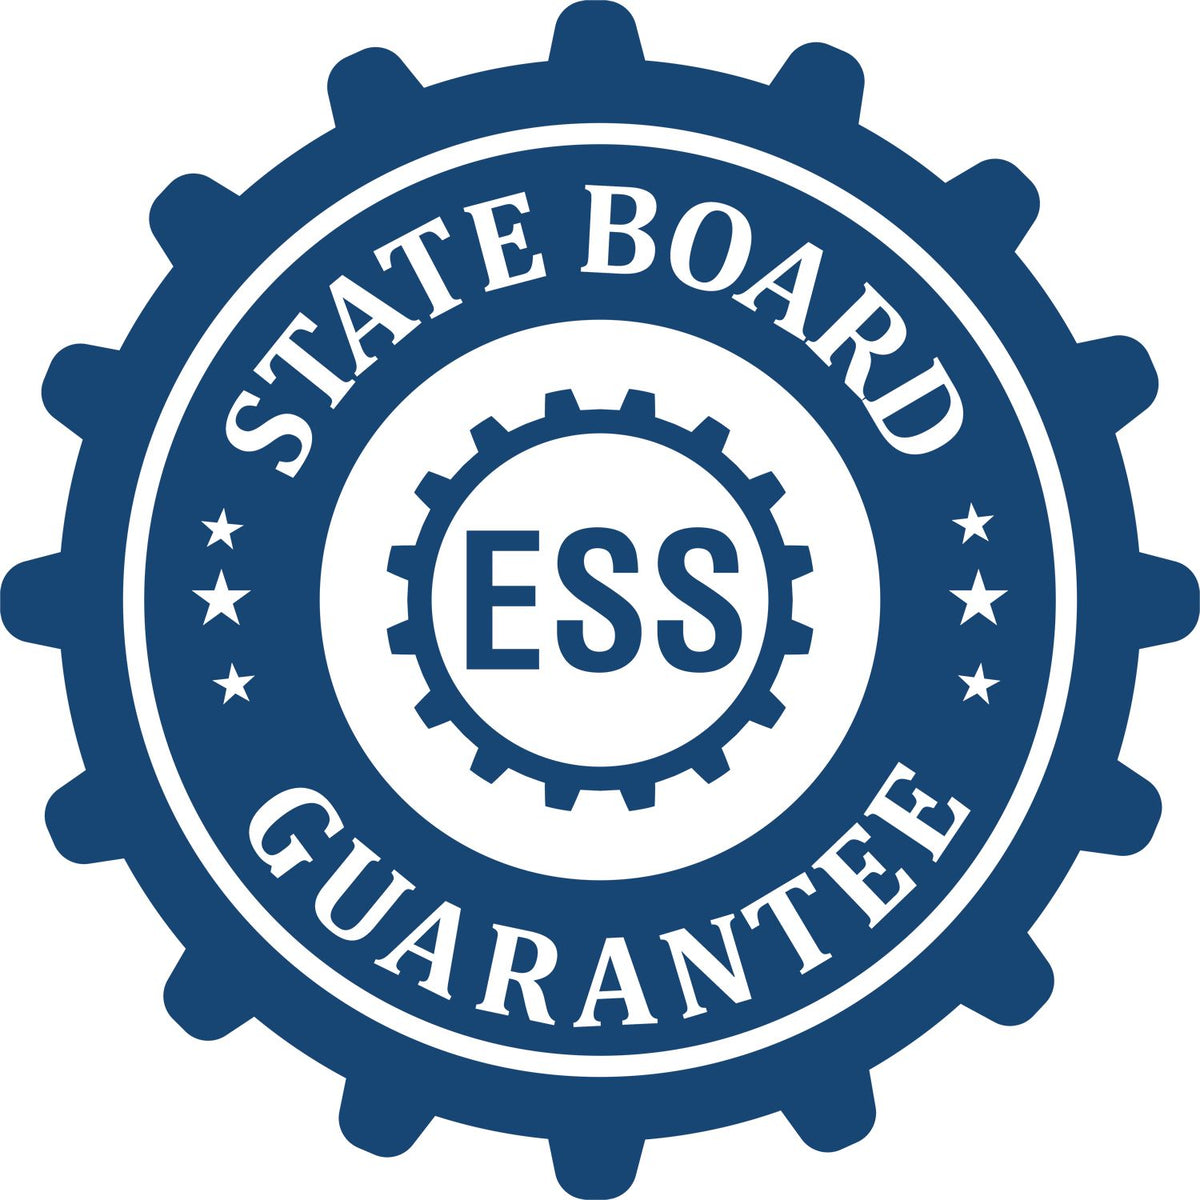 An emblem in a gear shape illustrating a state board guarantee for the Hybrid North Carolina Geologist Seal